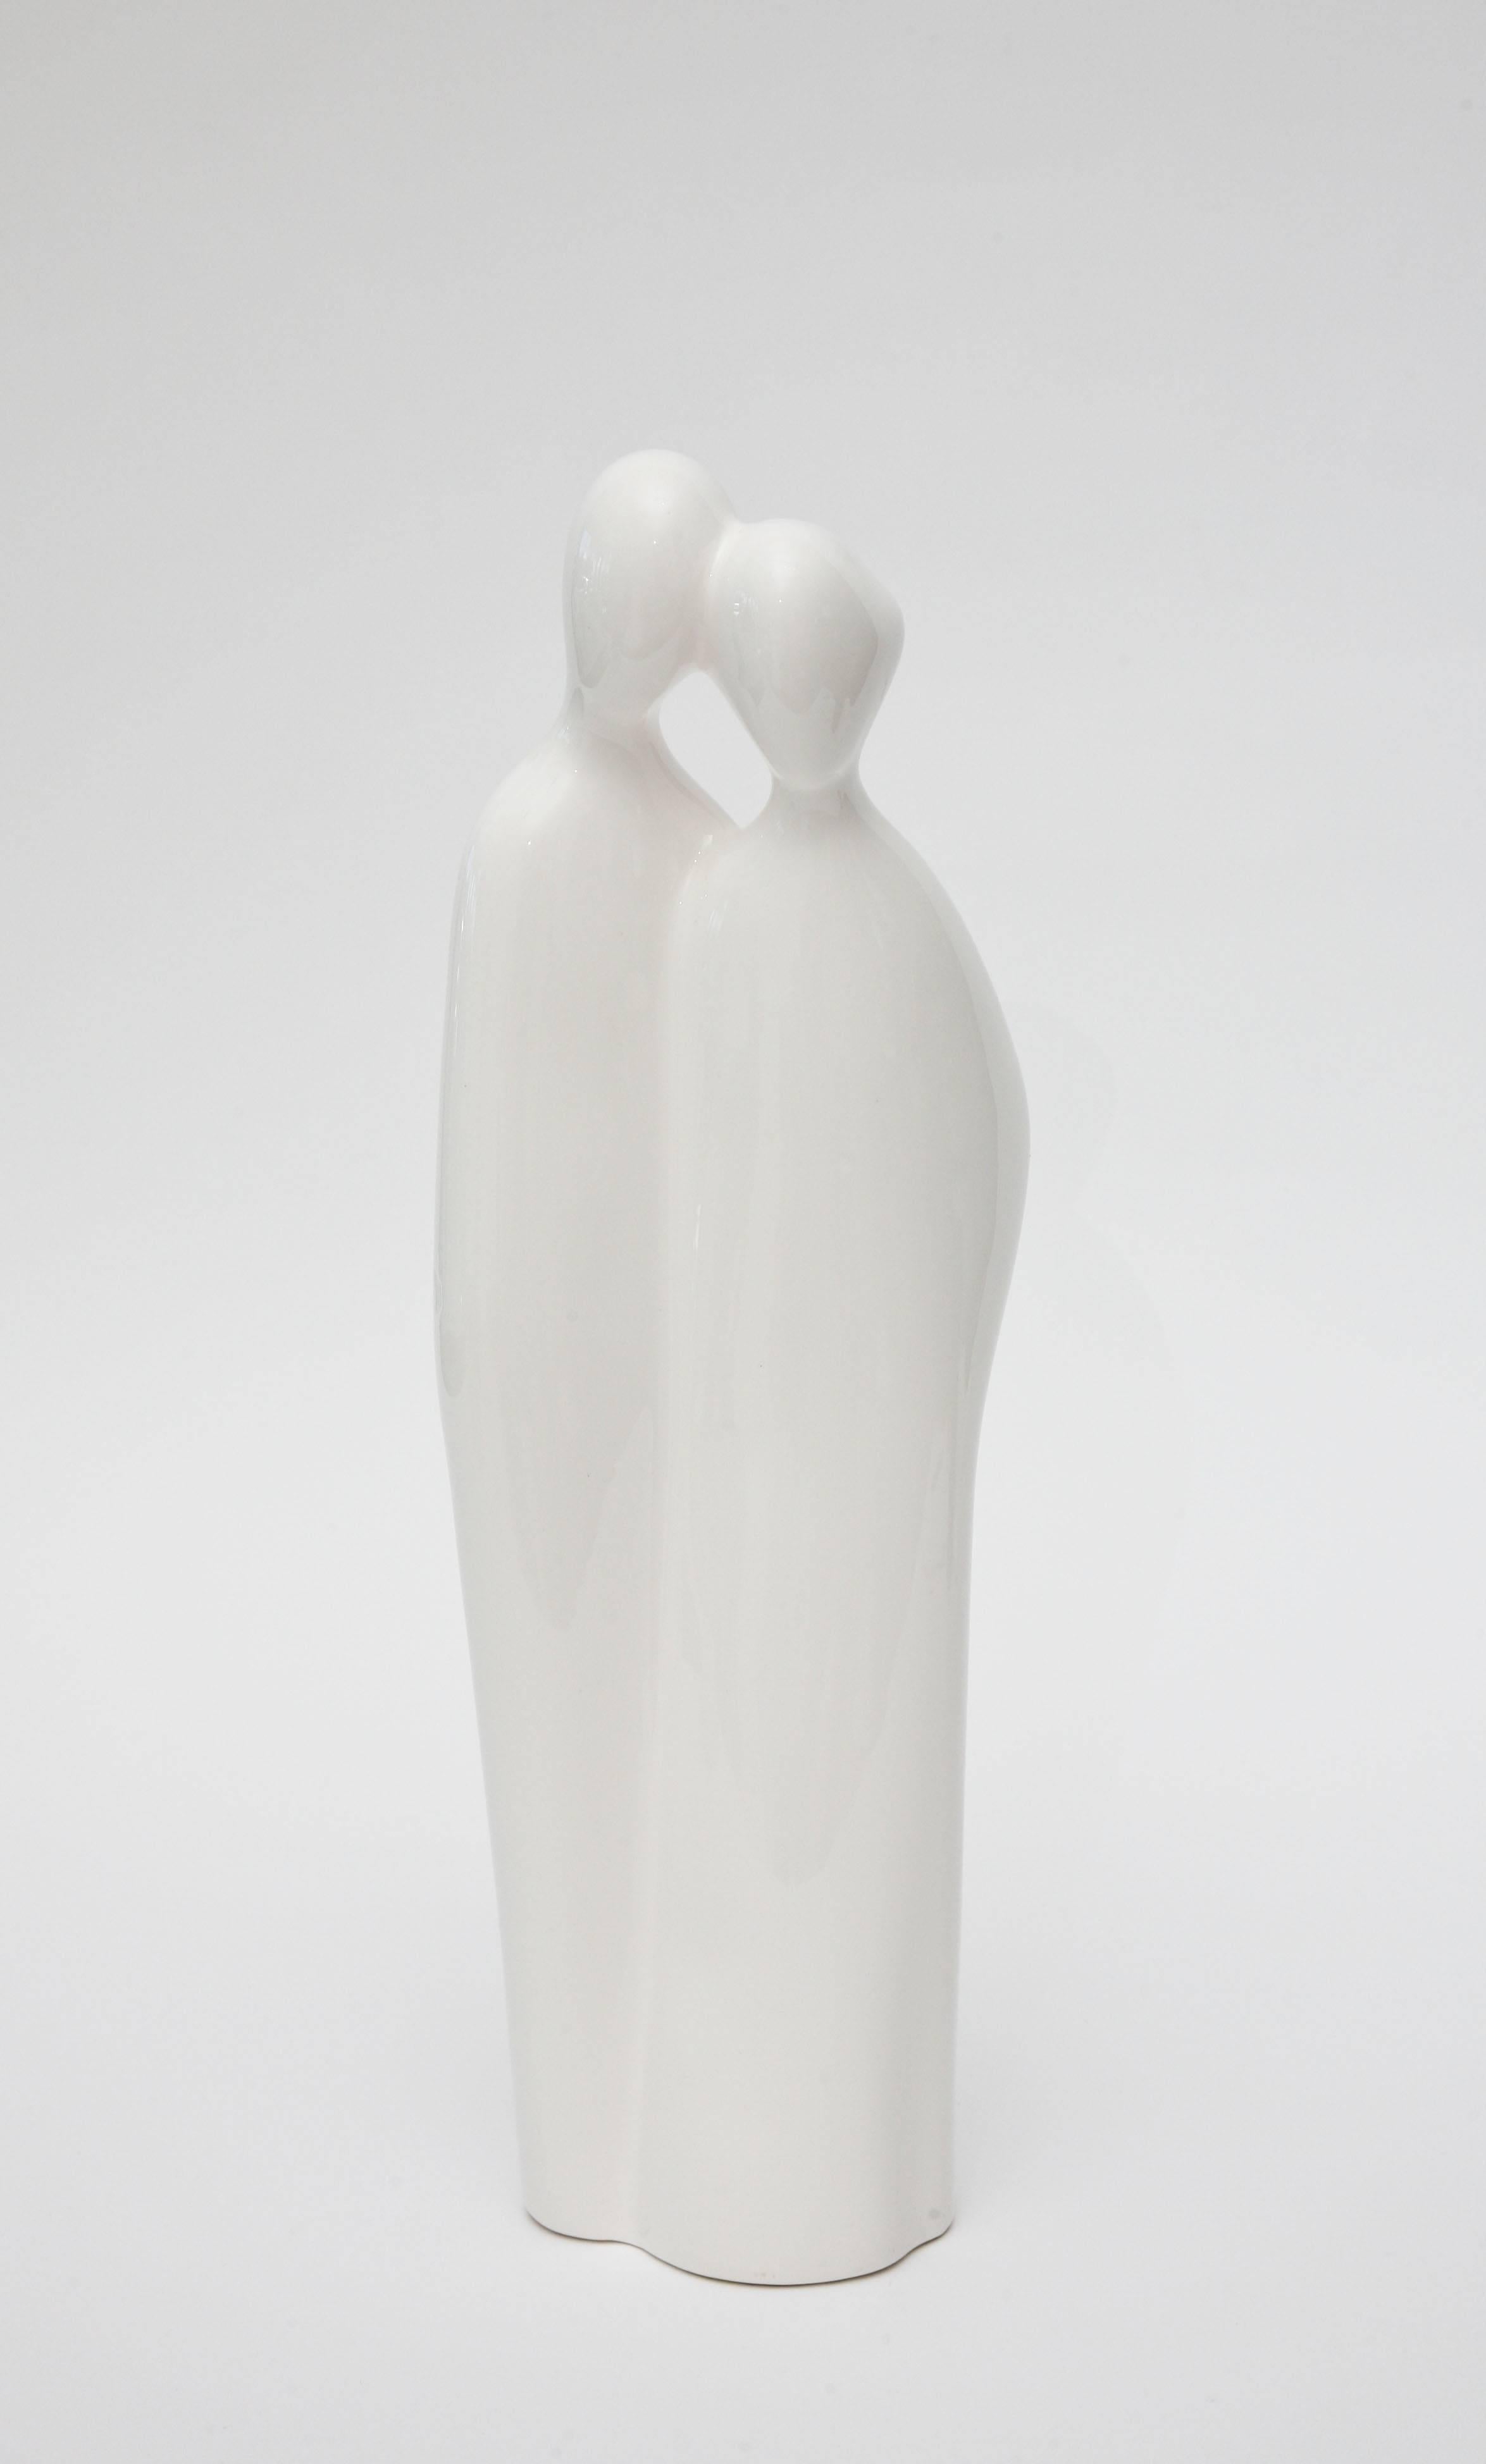 This tall vintage modernist sculpture and or object of an abstract couple; man/woman in repose is white to off-white porcelain by Rosenthal Netter who was the manufacturer.  Part of the original label is still on the bottom. This is from the 60's.

